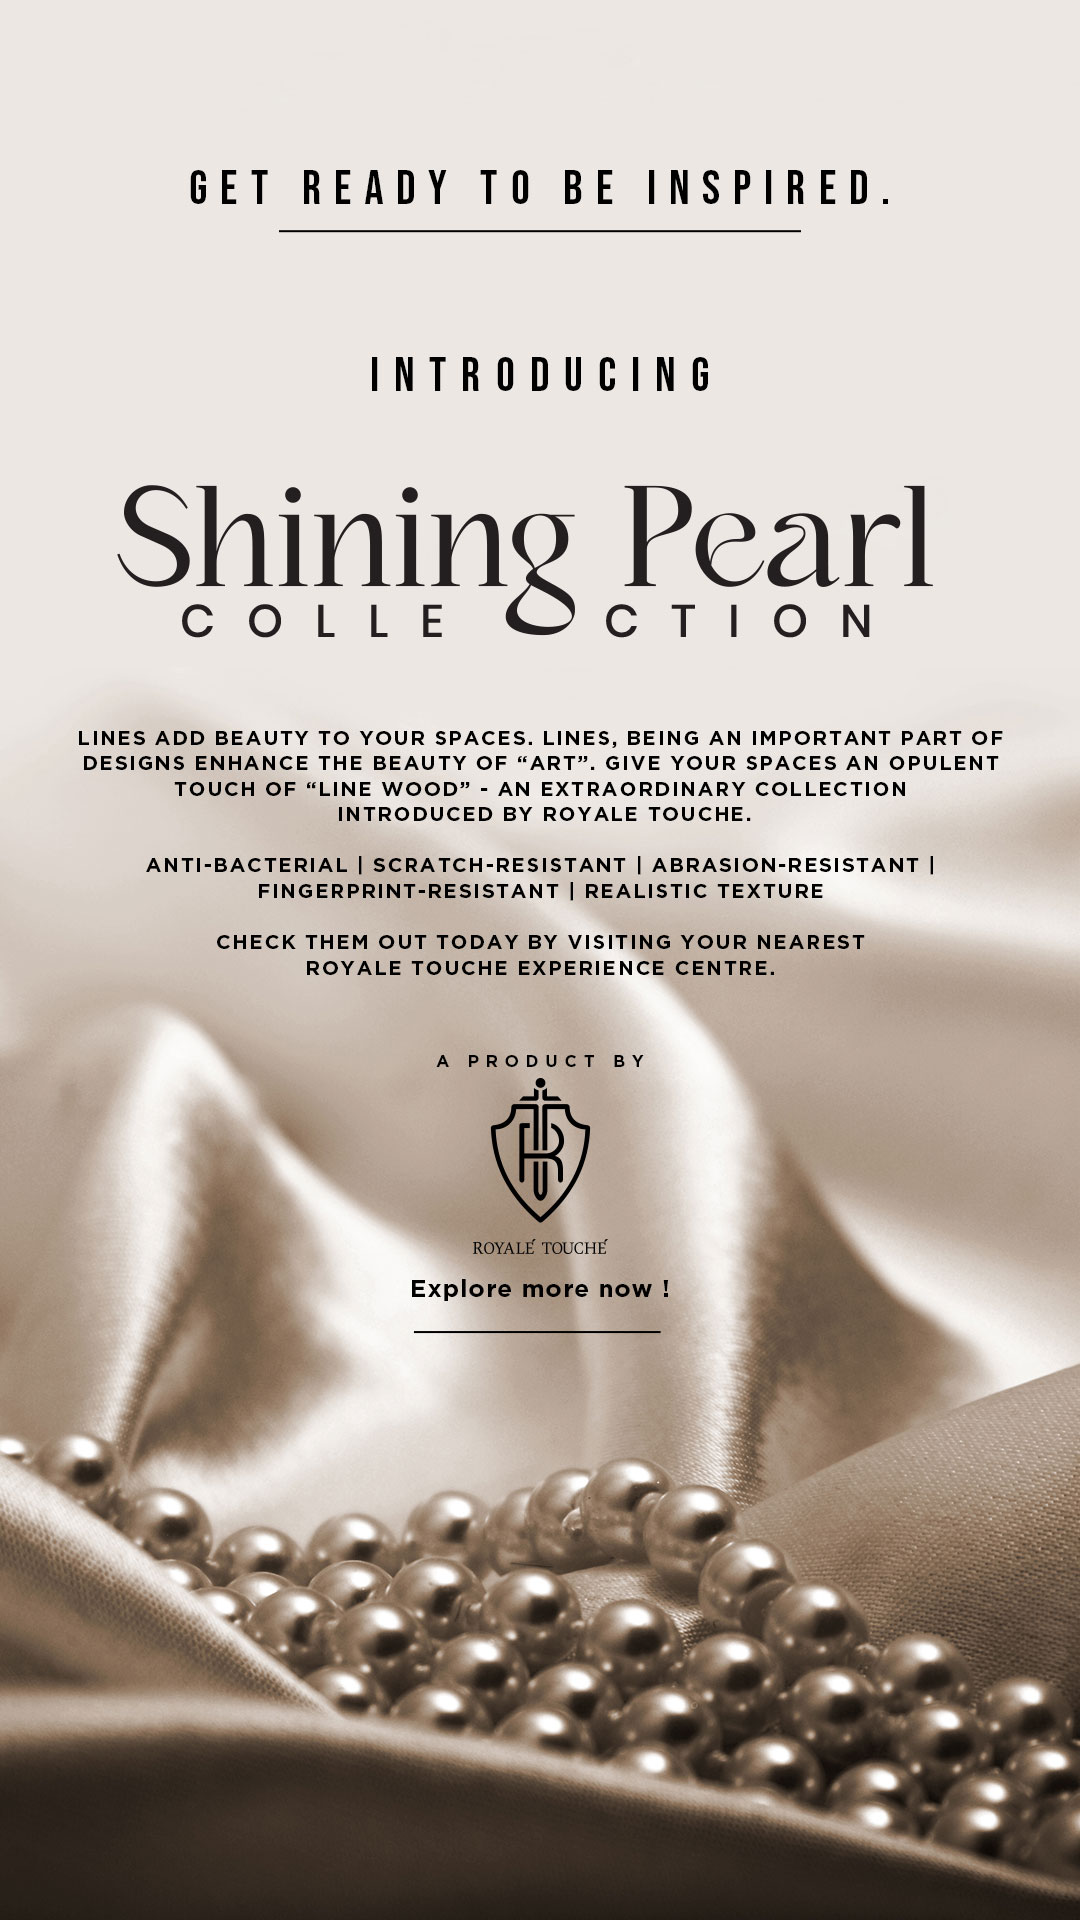 'Shining Pearl' Collection